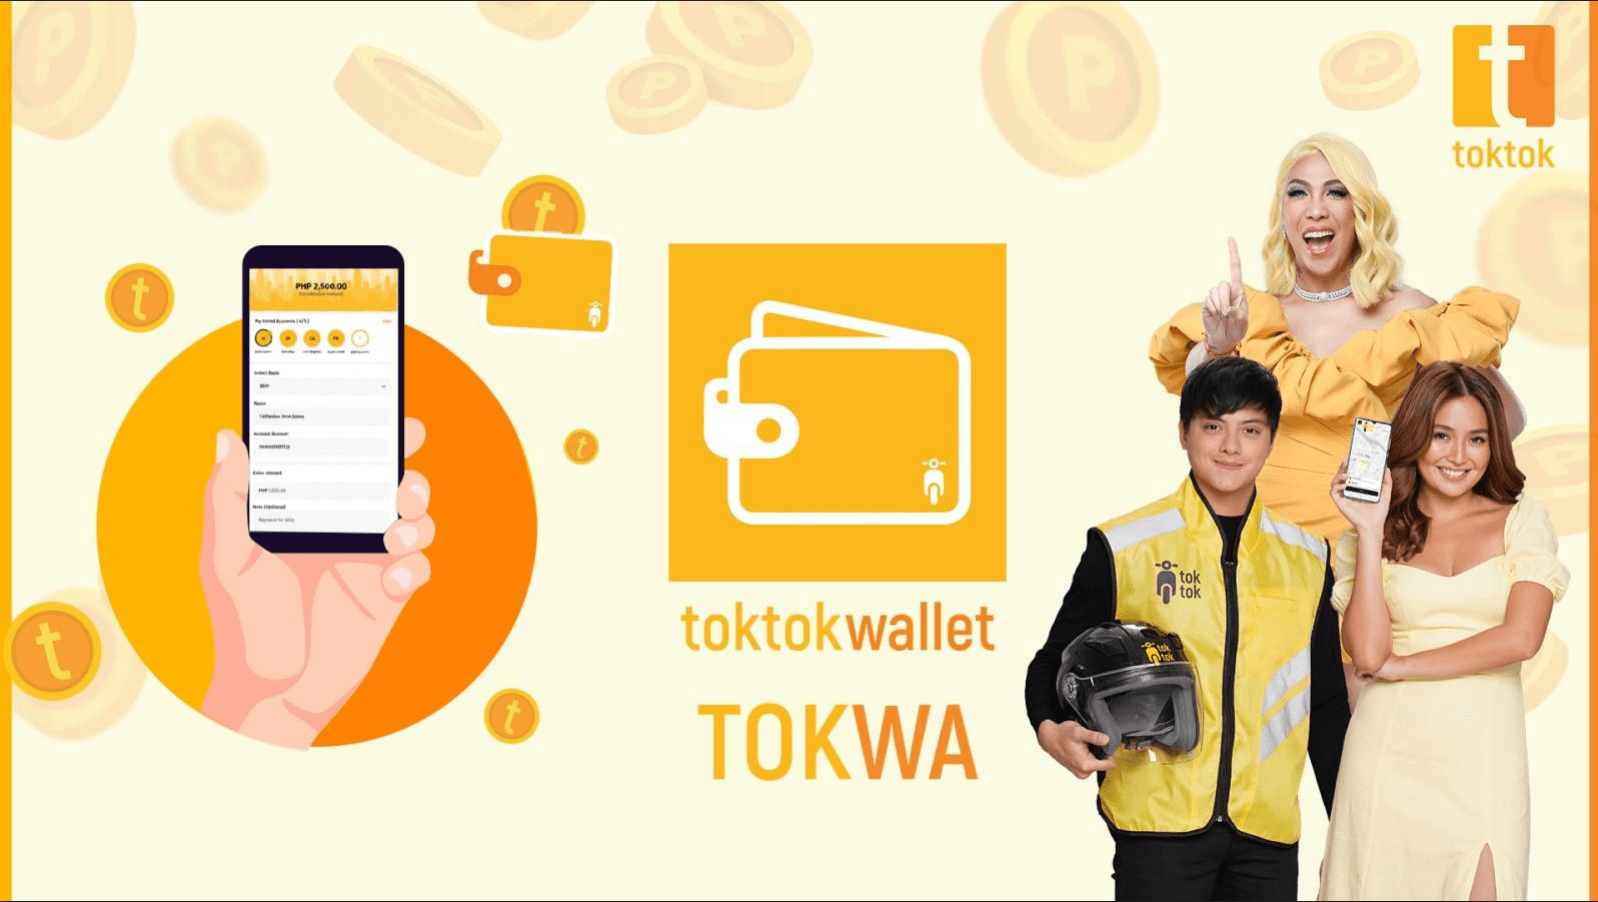 You are currently viewing How to create toktok wallet account